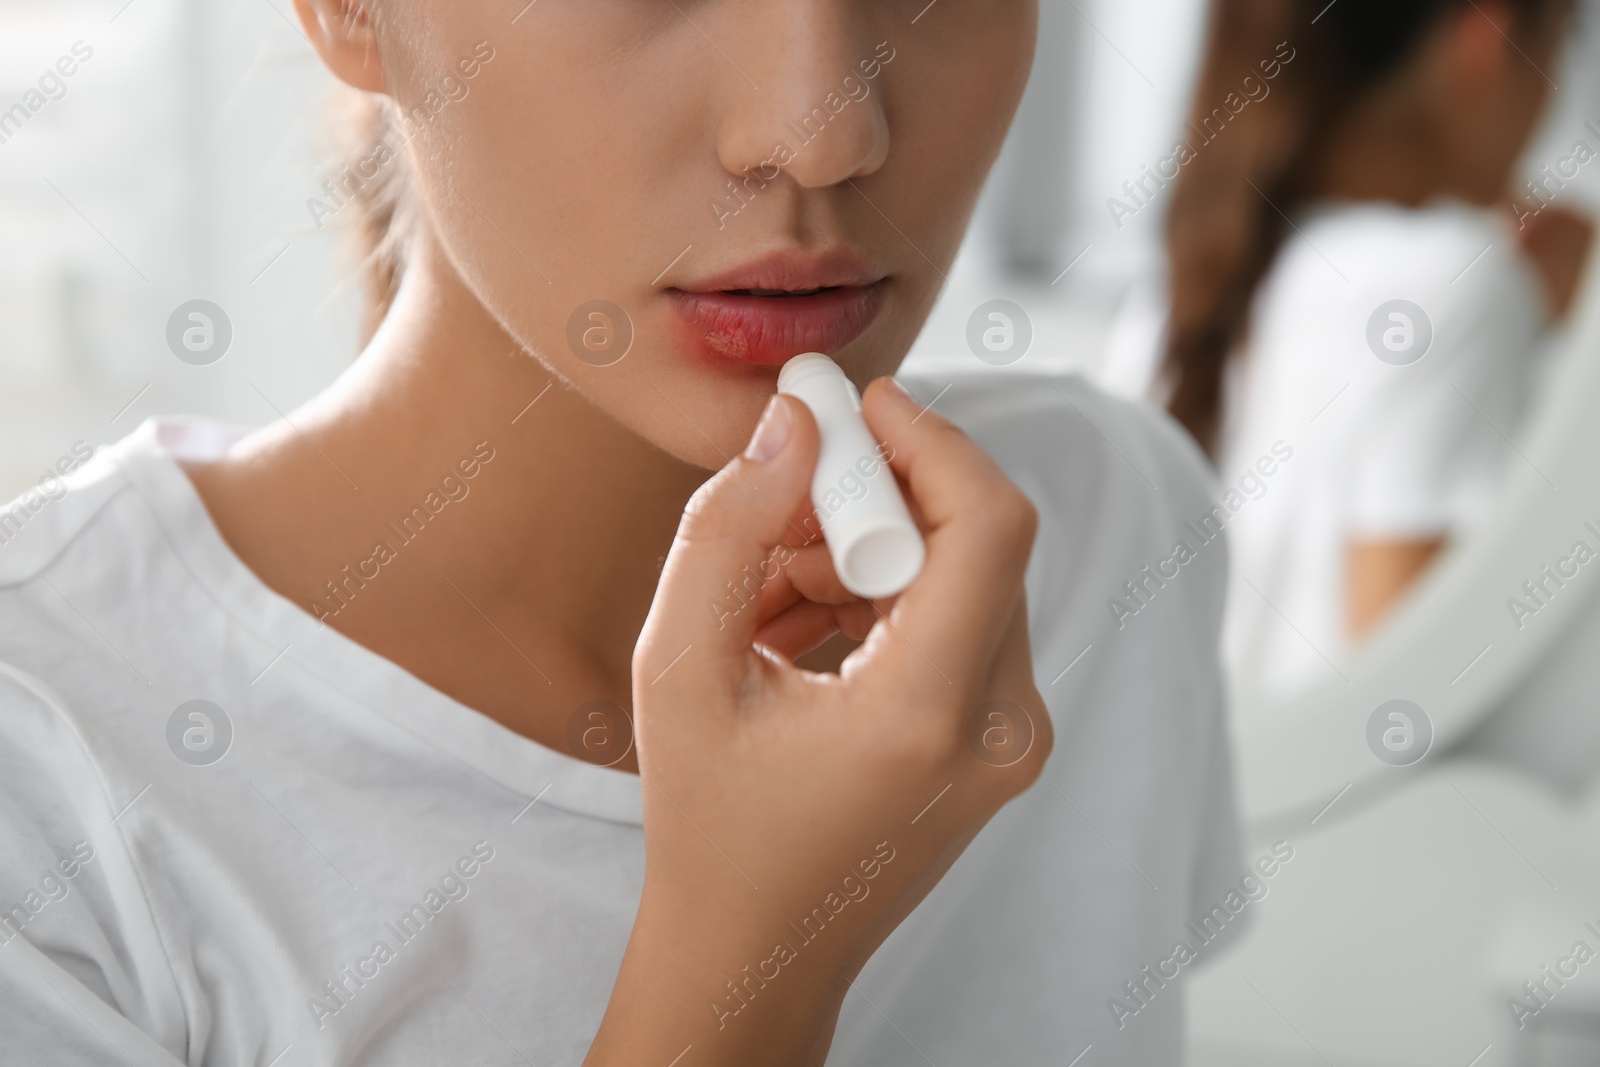 Photo of Woman with herpes applying lip balm against blurred background, closeup